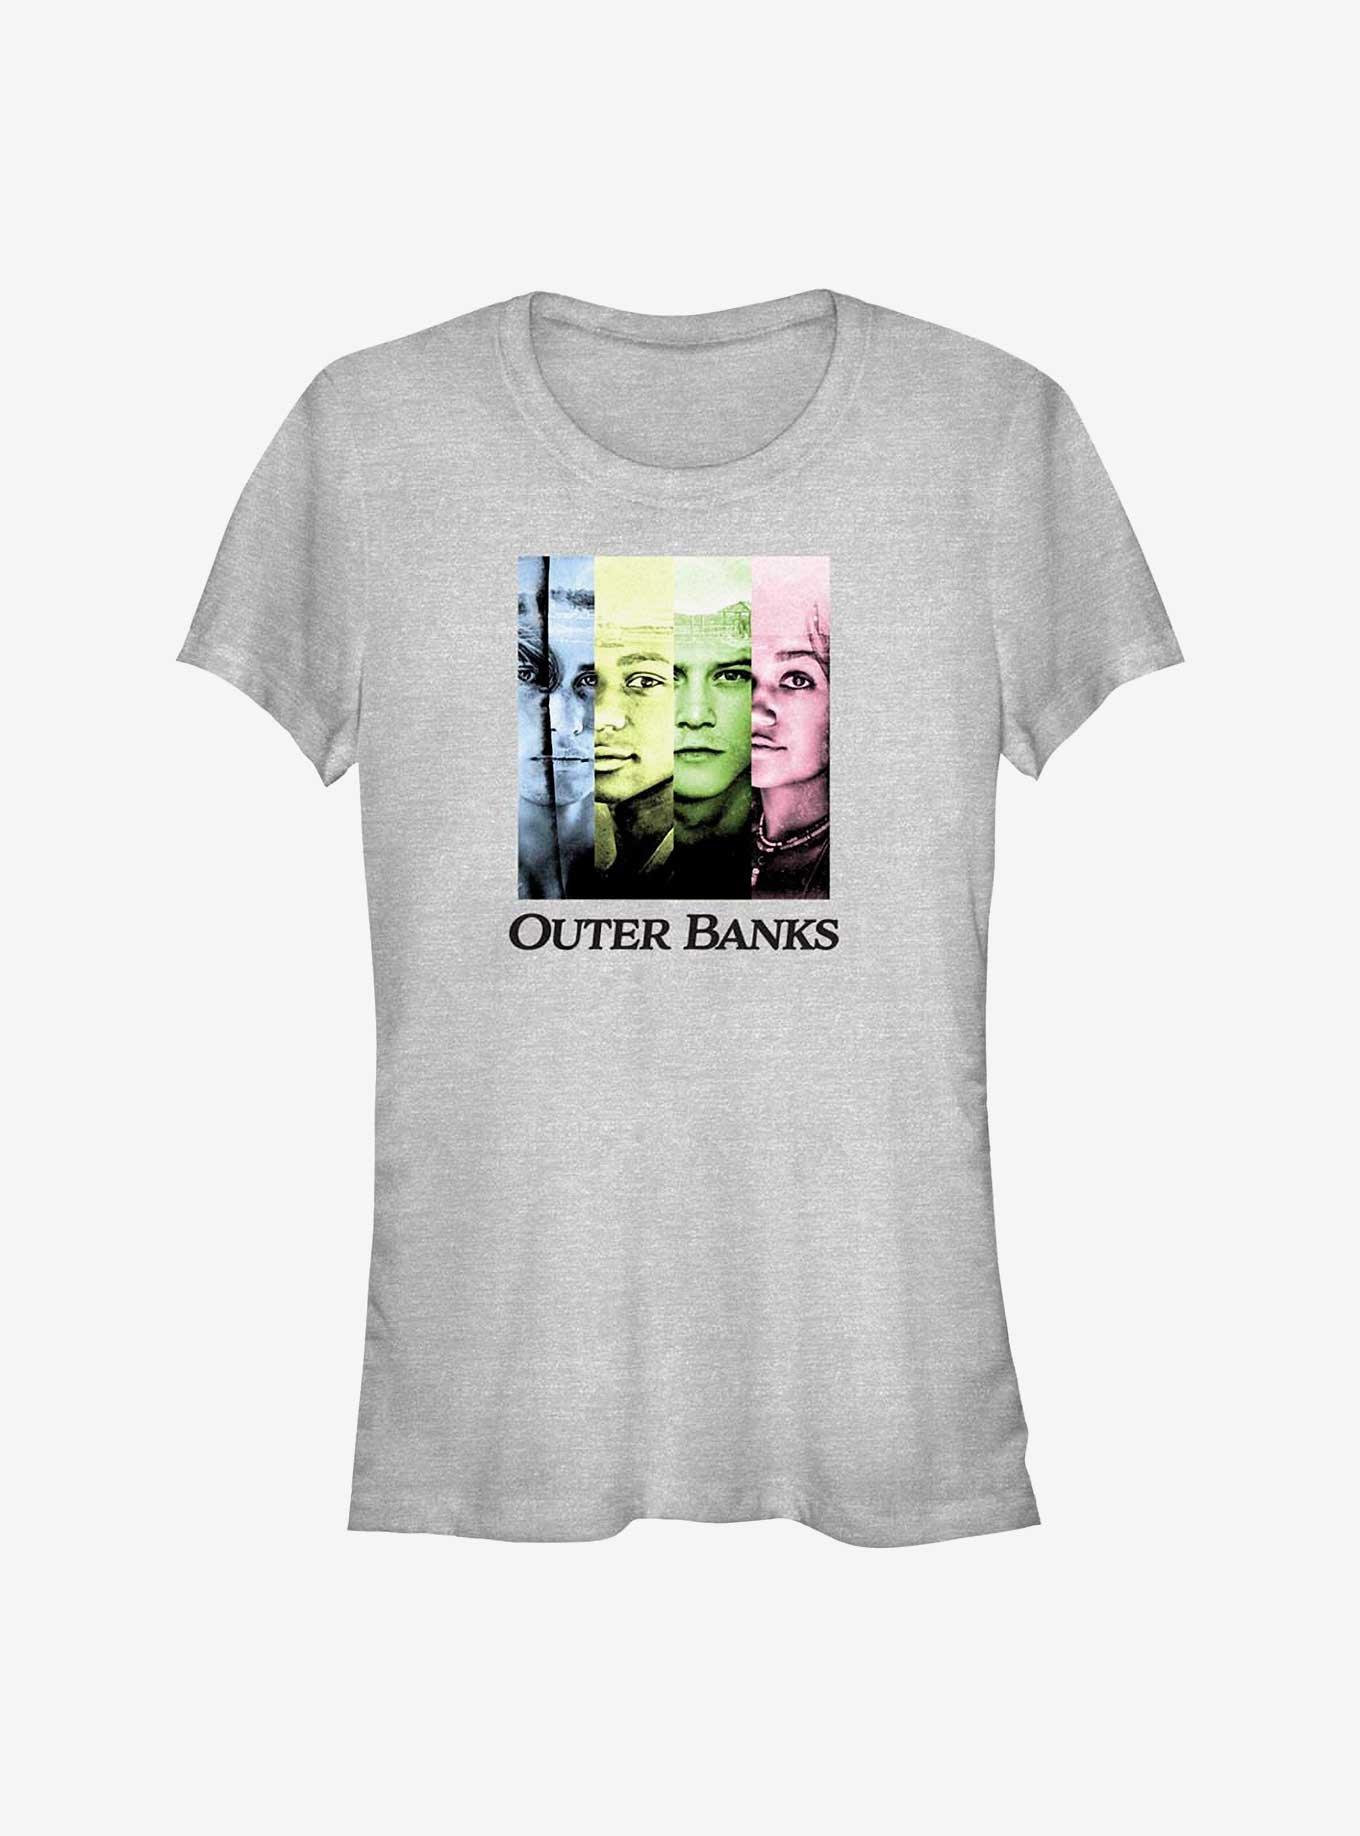 Outer Banks Cast Line Up Girls T-Shirt